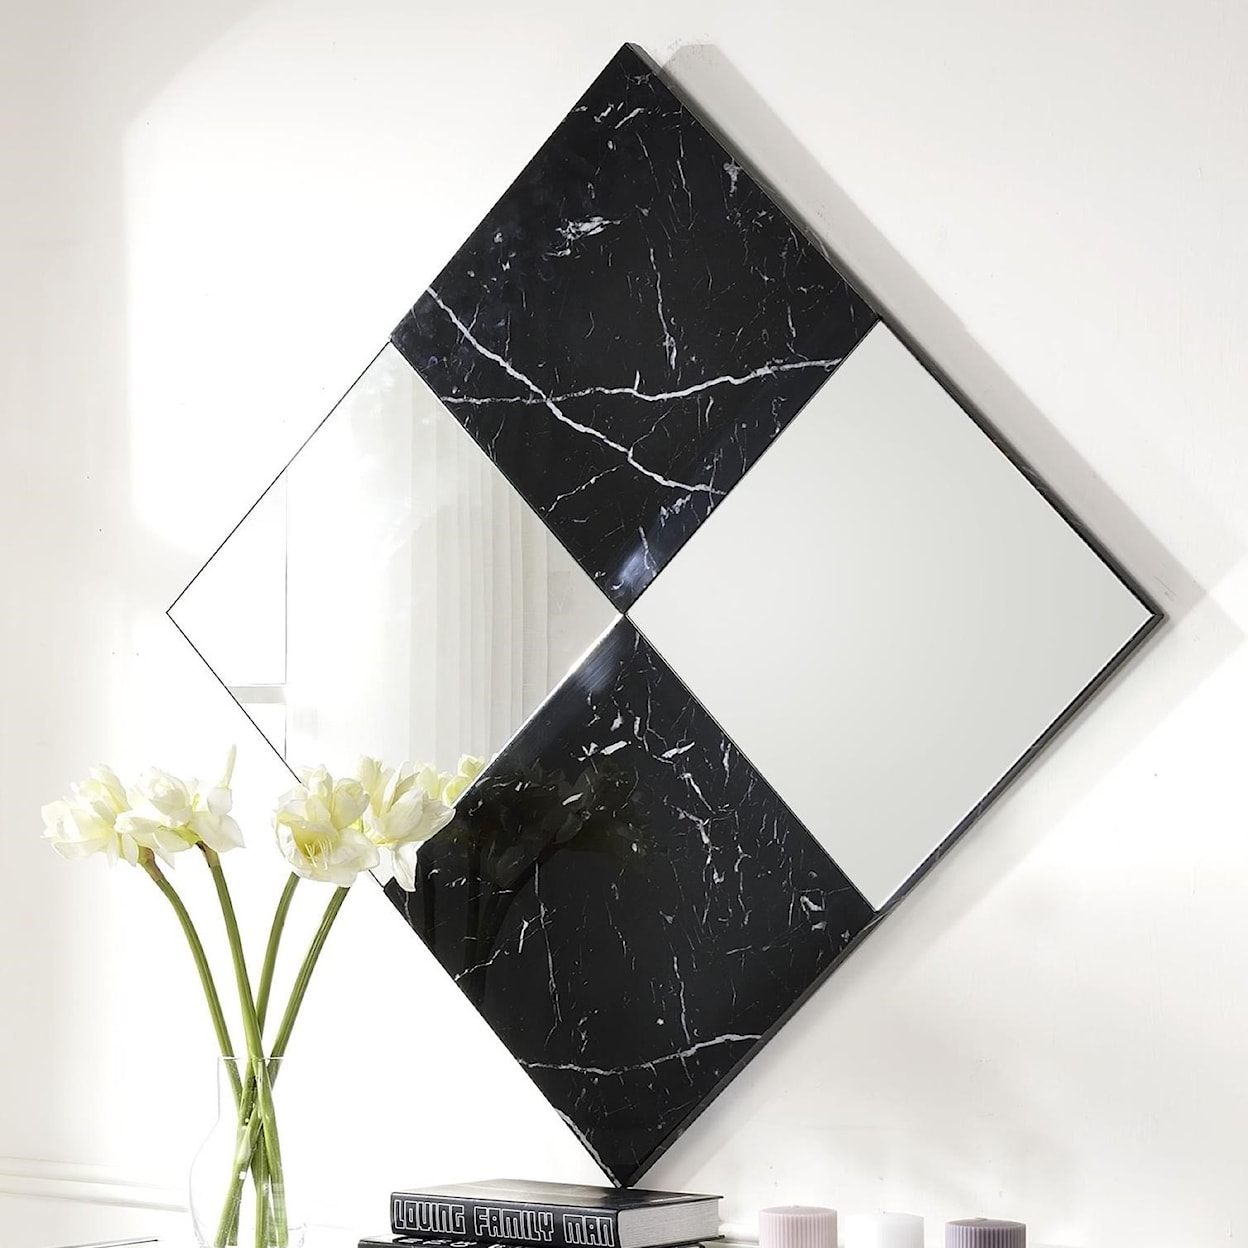 Acme Furniture Angwin Accent Wall Mirror